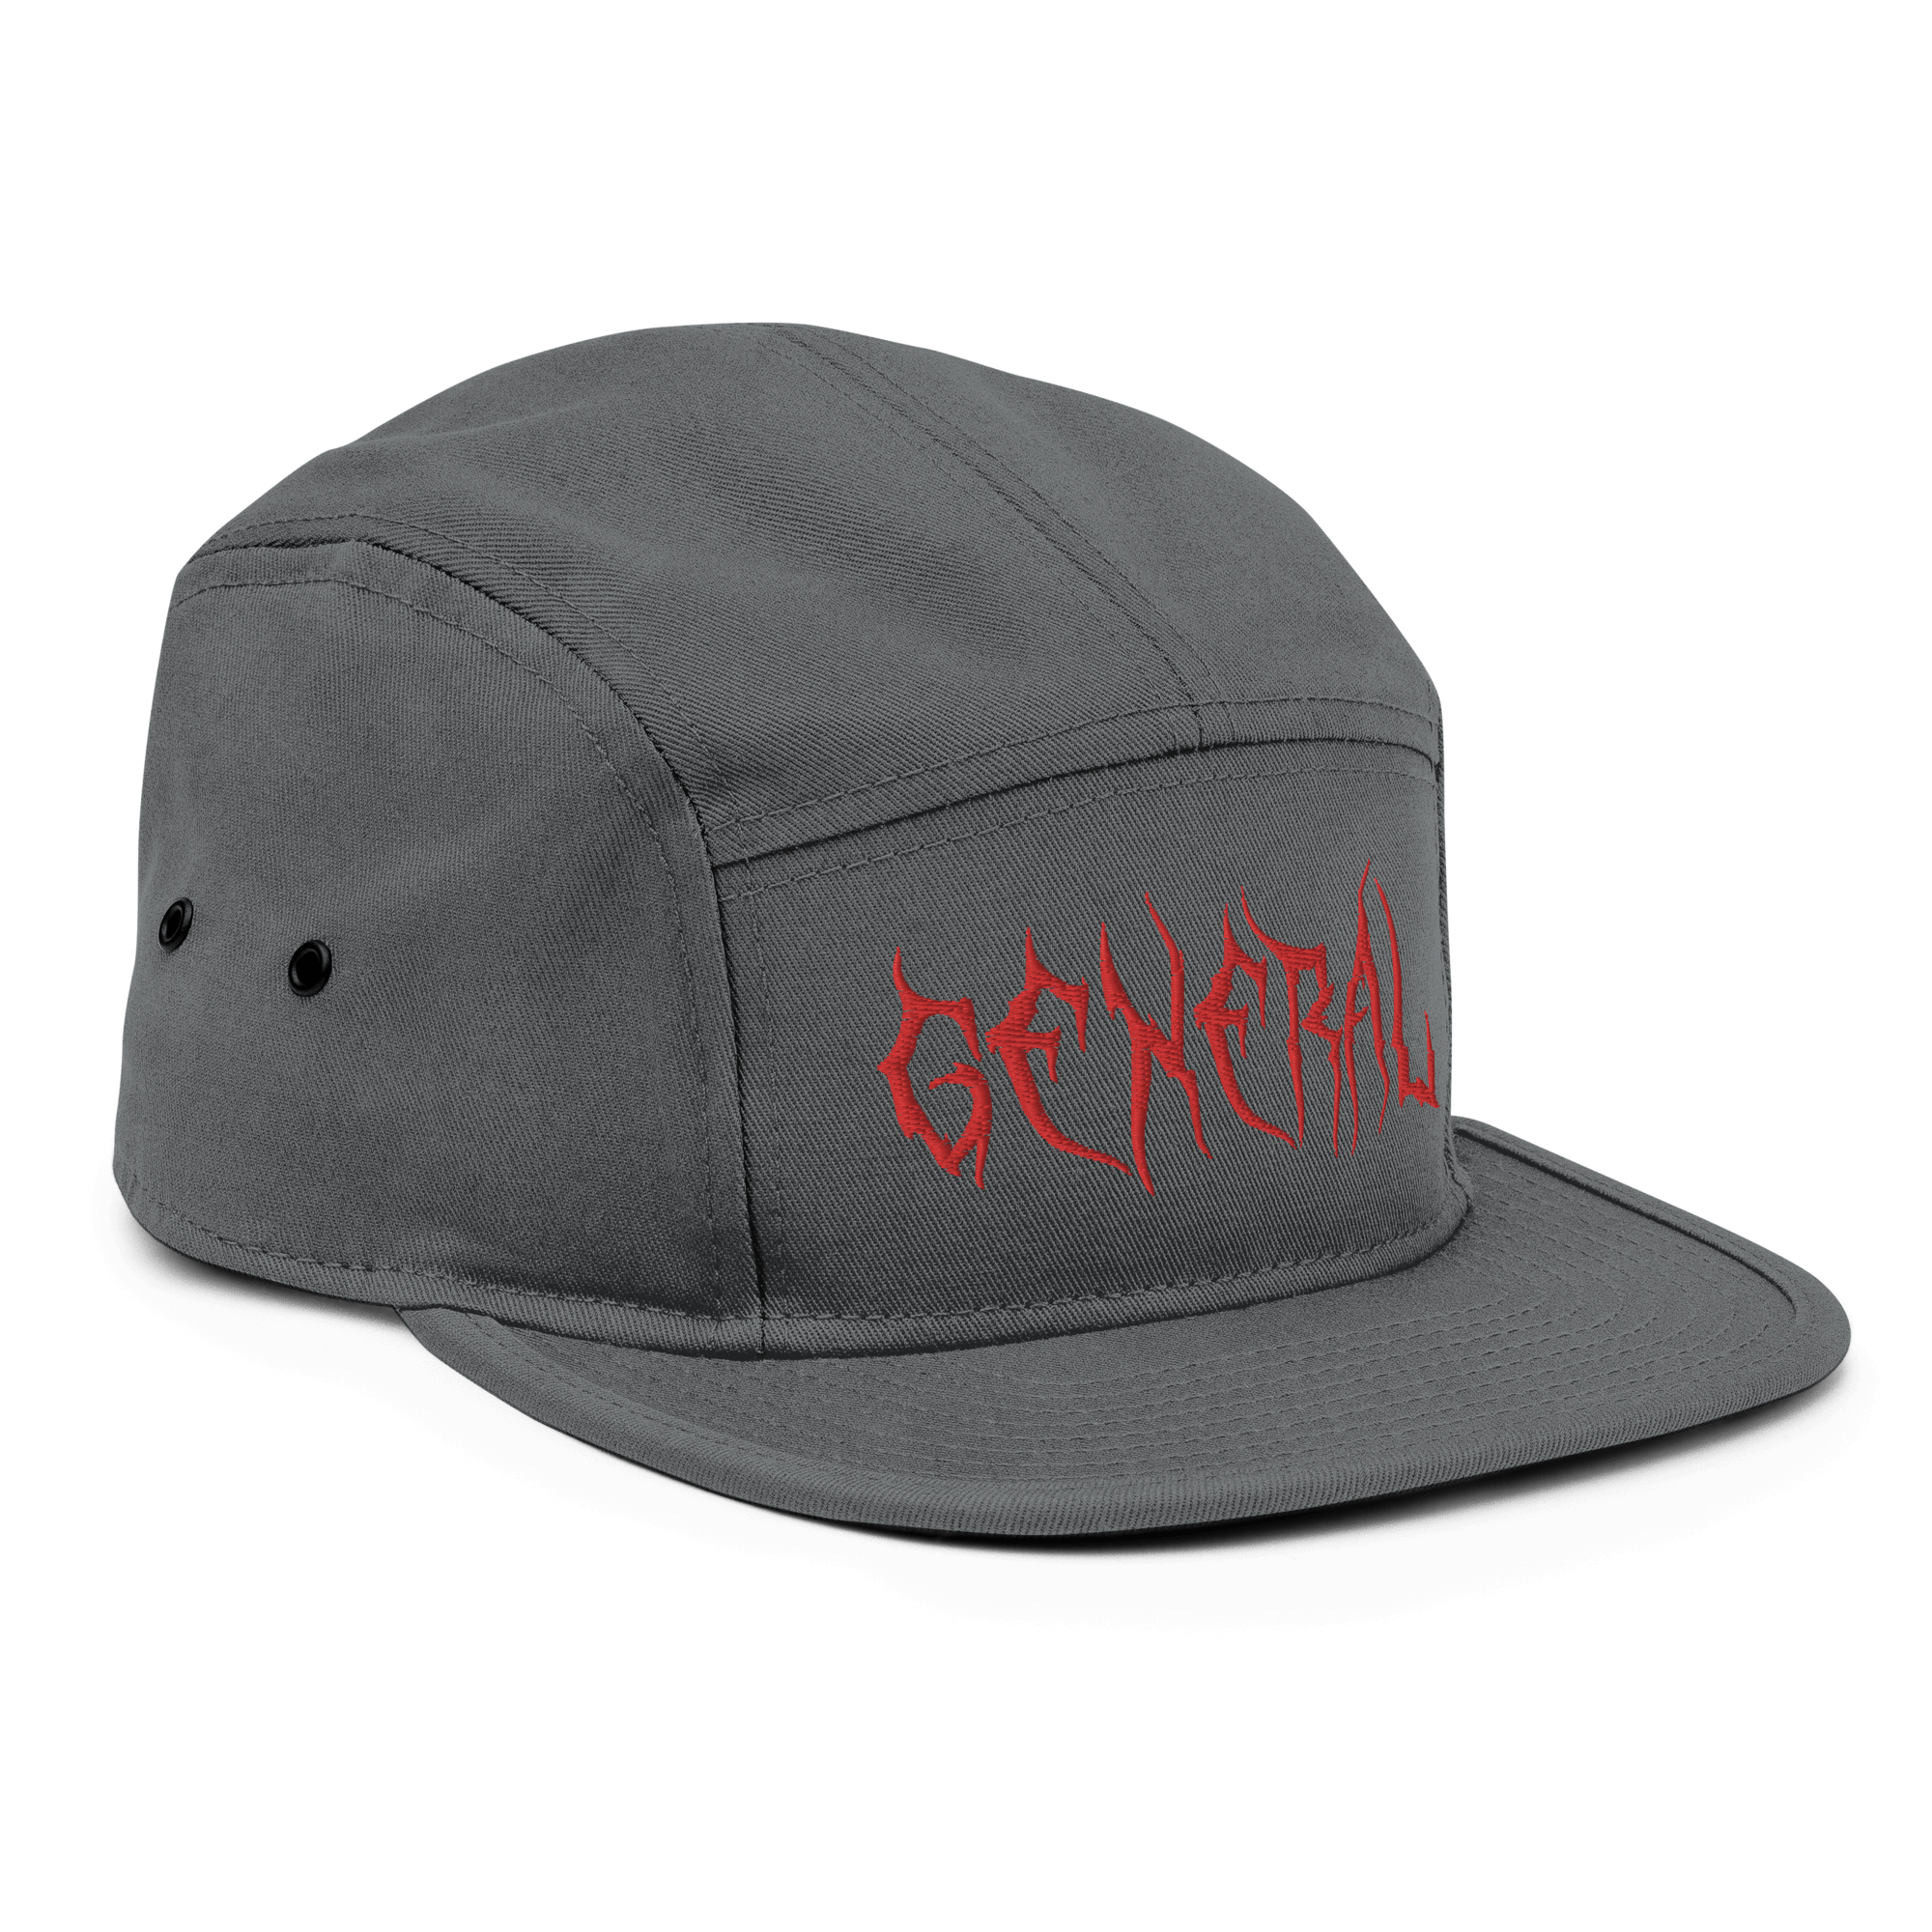 General Camper CapEmbrace the power of General Heavy Metal Style with our Camper Cap. This structured, low-fitting cap features a firm front panel, ensuring a bold statement. Crafted just for you upon order, the slight delay is the mark of a personalized